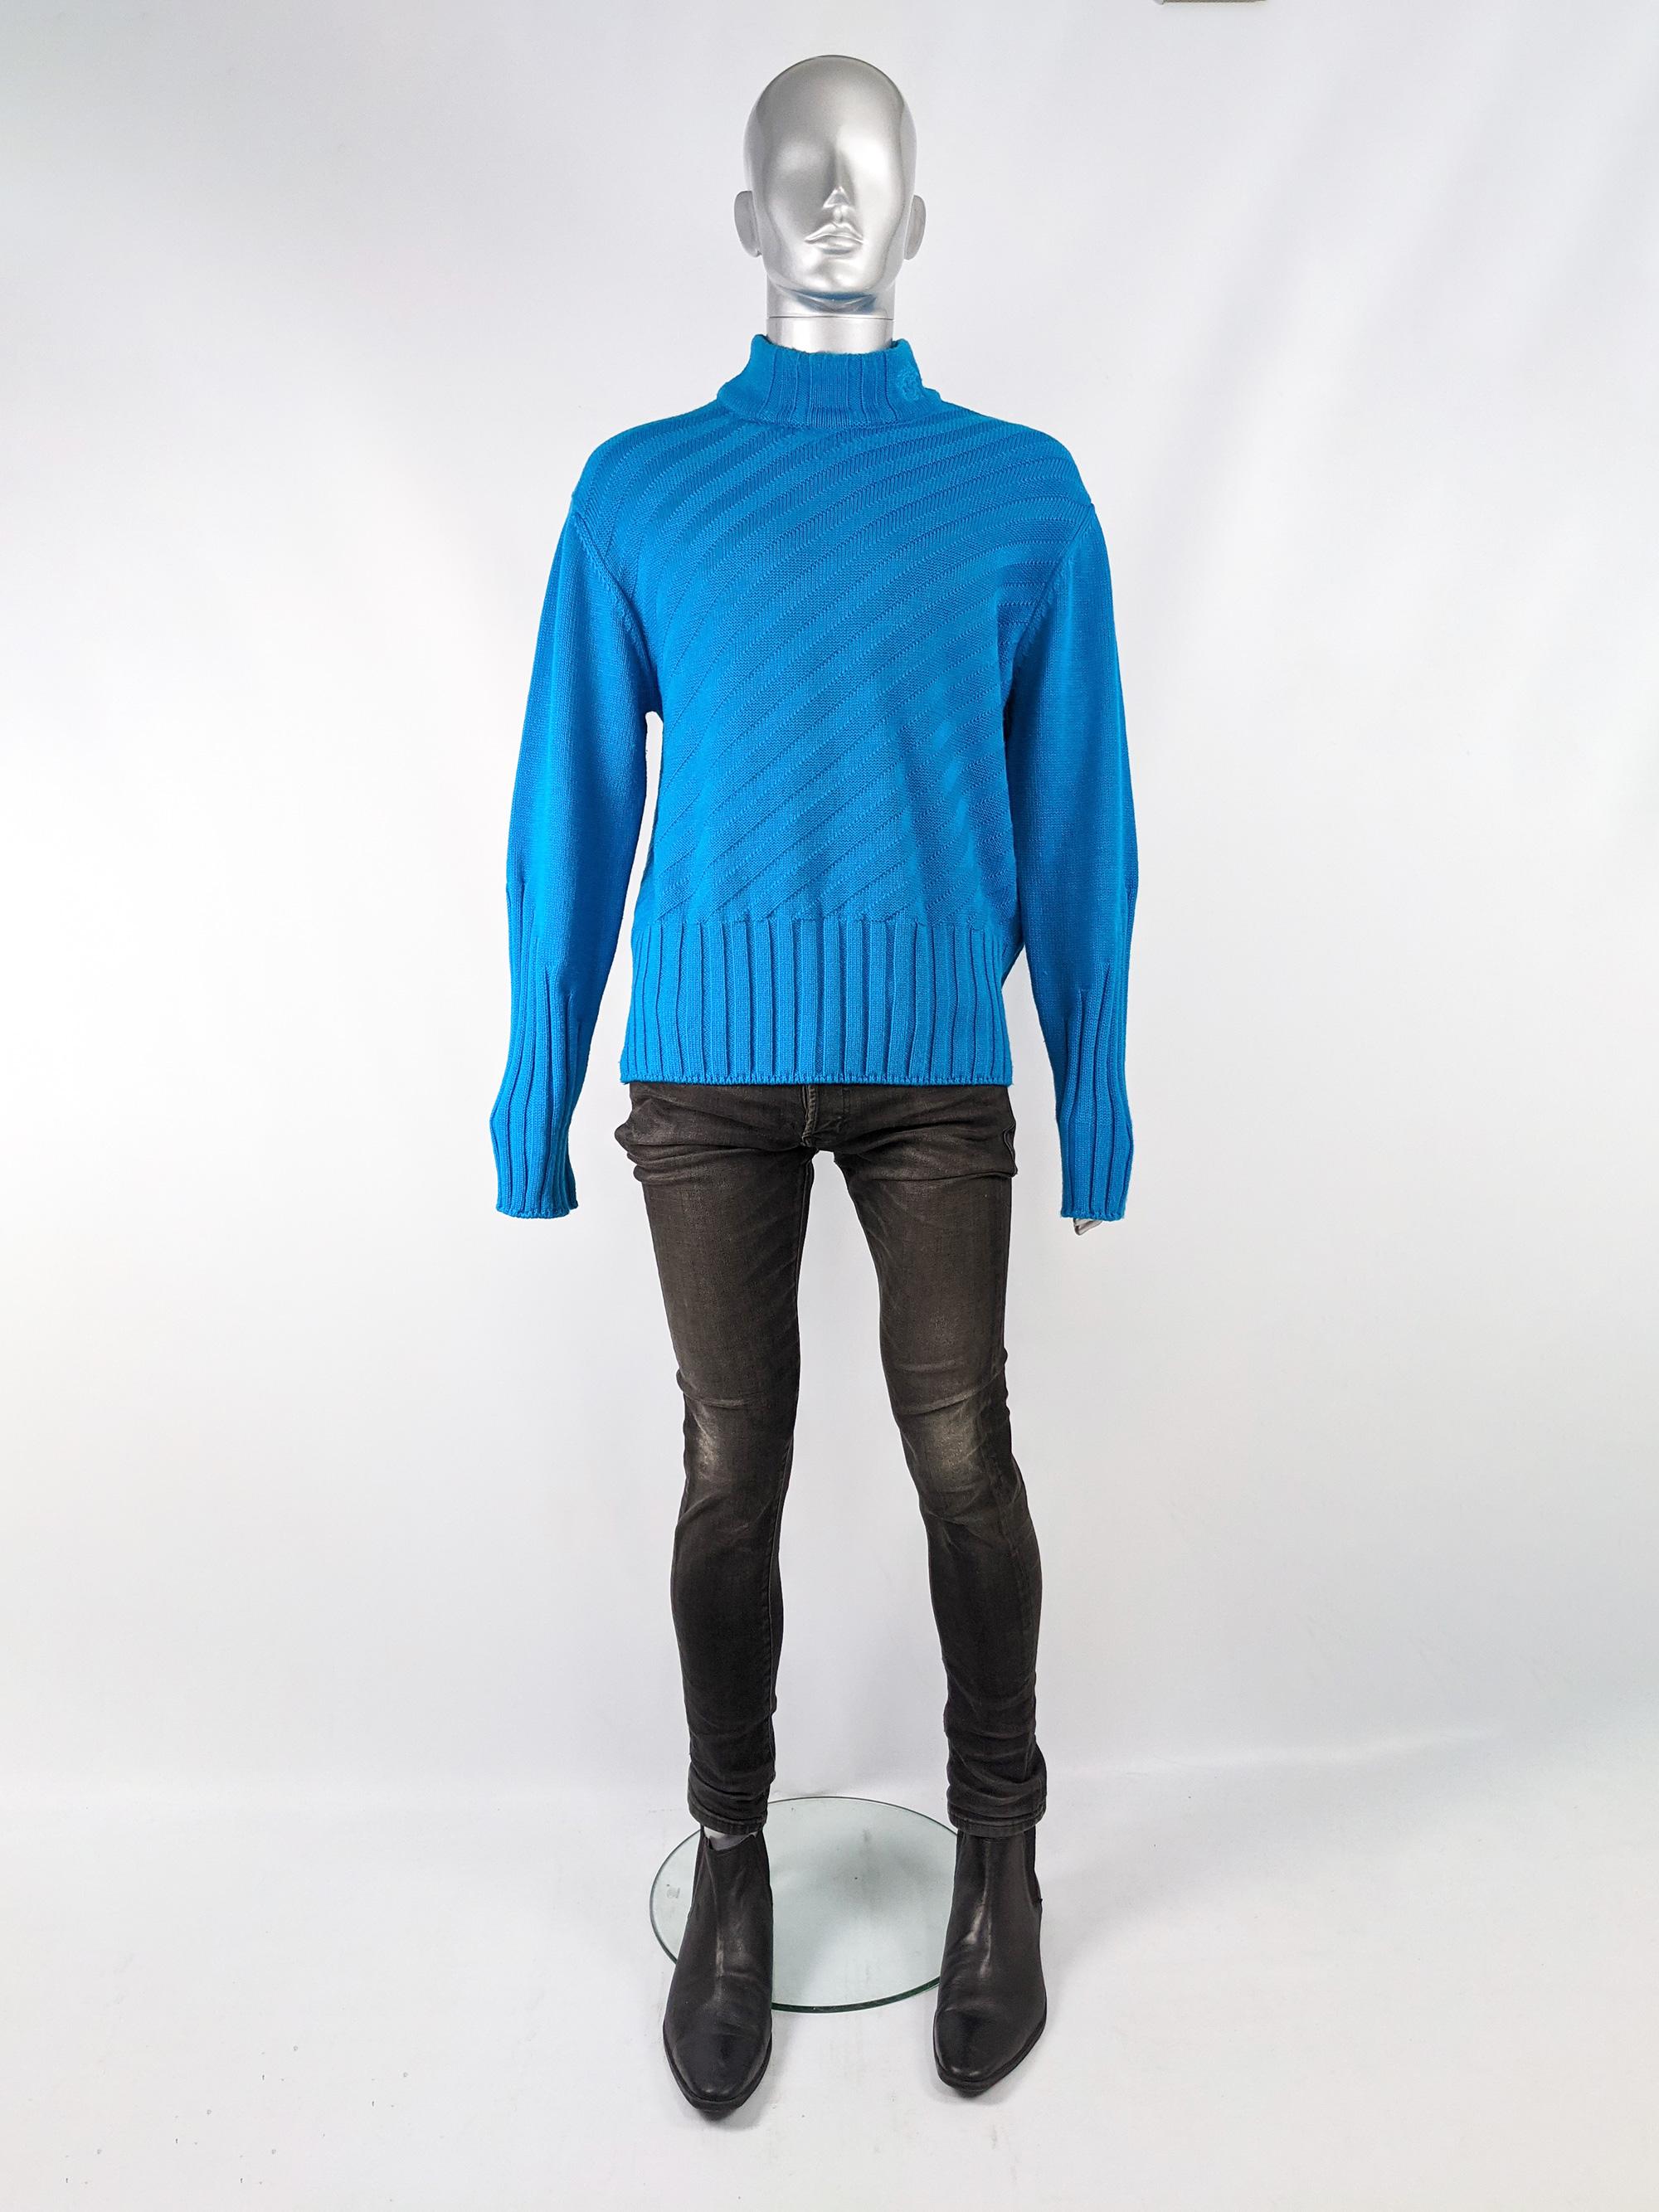 An amazing vintage man's Versace jeans Couture sweater from the 90s in a turquoise blue wool with contrasting ribbed knit techniques and extra long sleeves that can be turned up. The mock neck has Medusa logo embroidered on one side. Perfect for